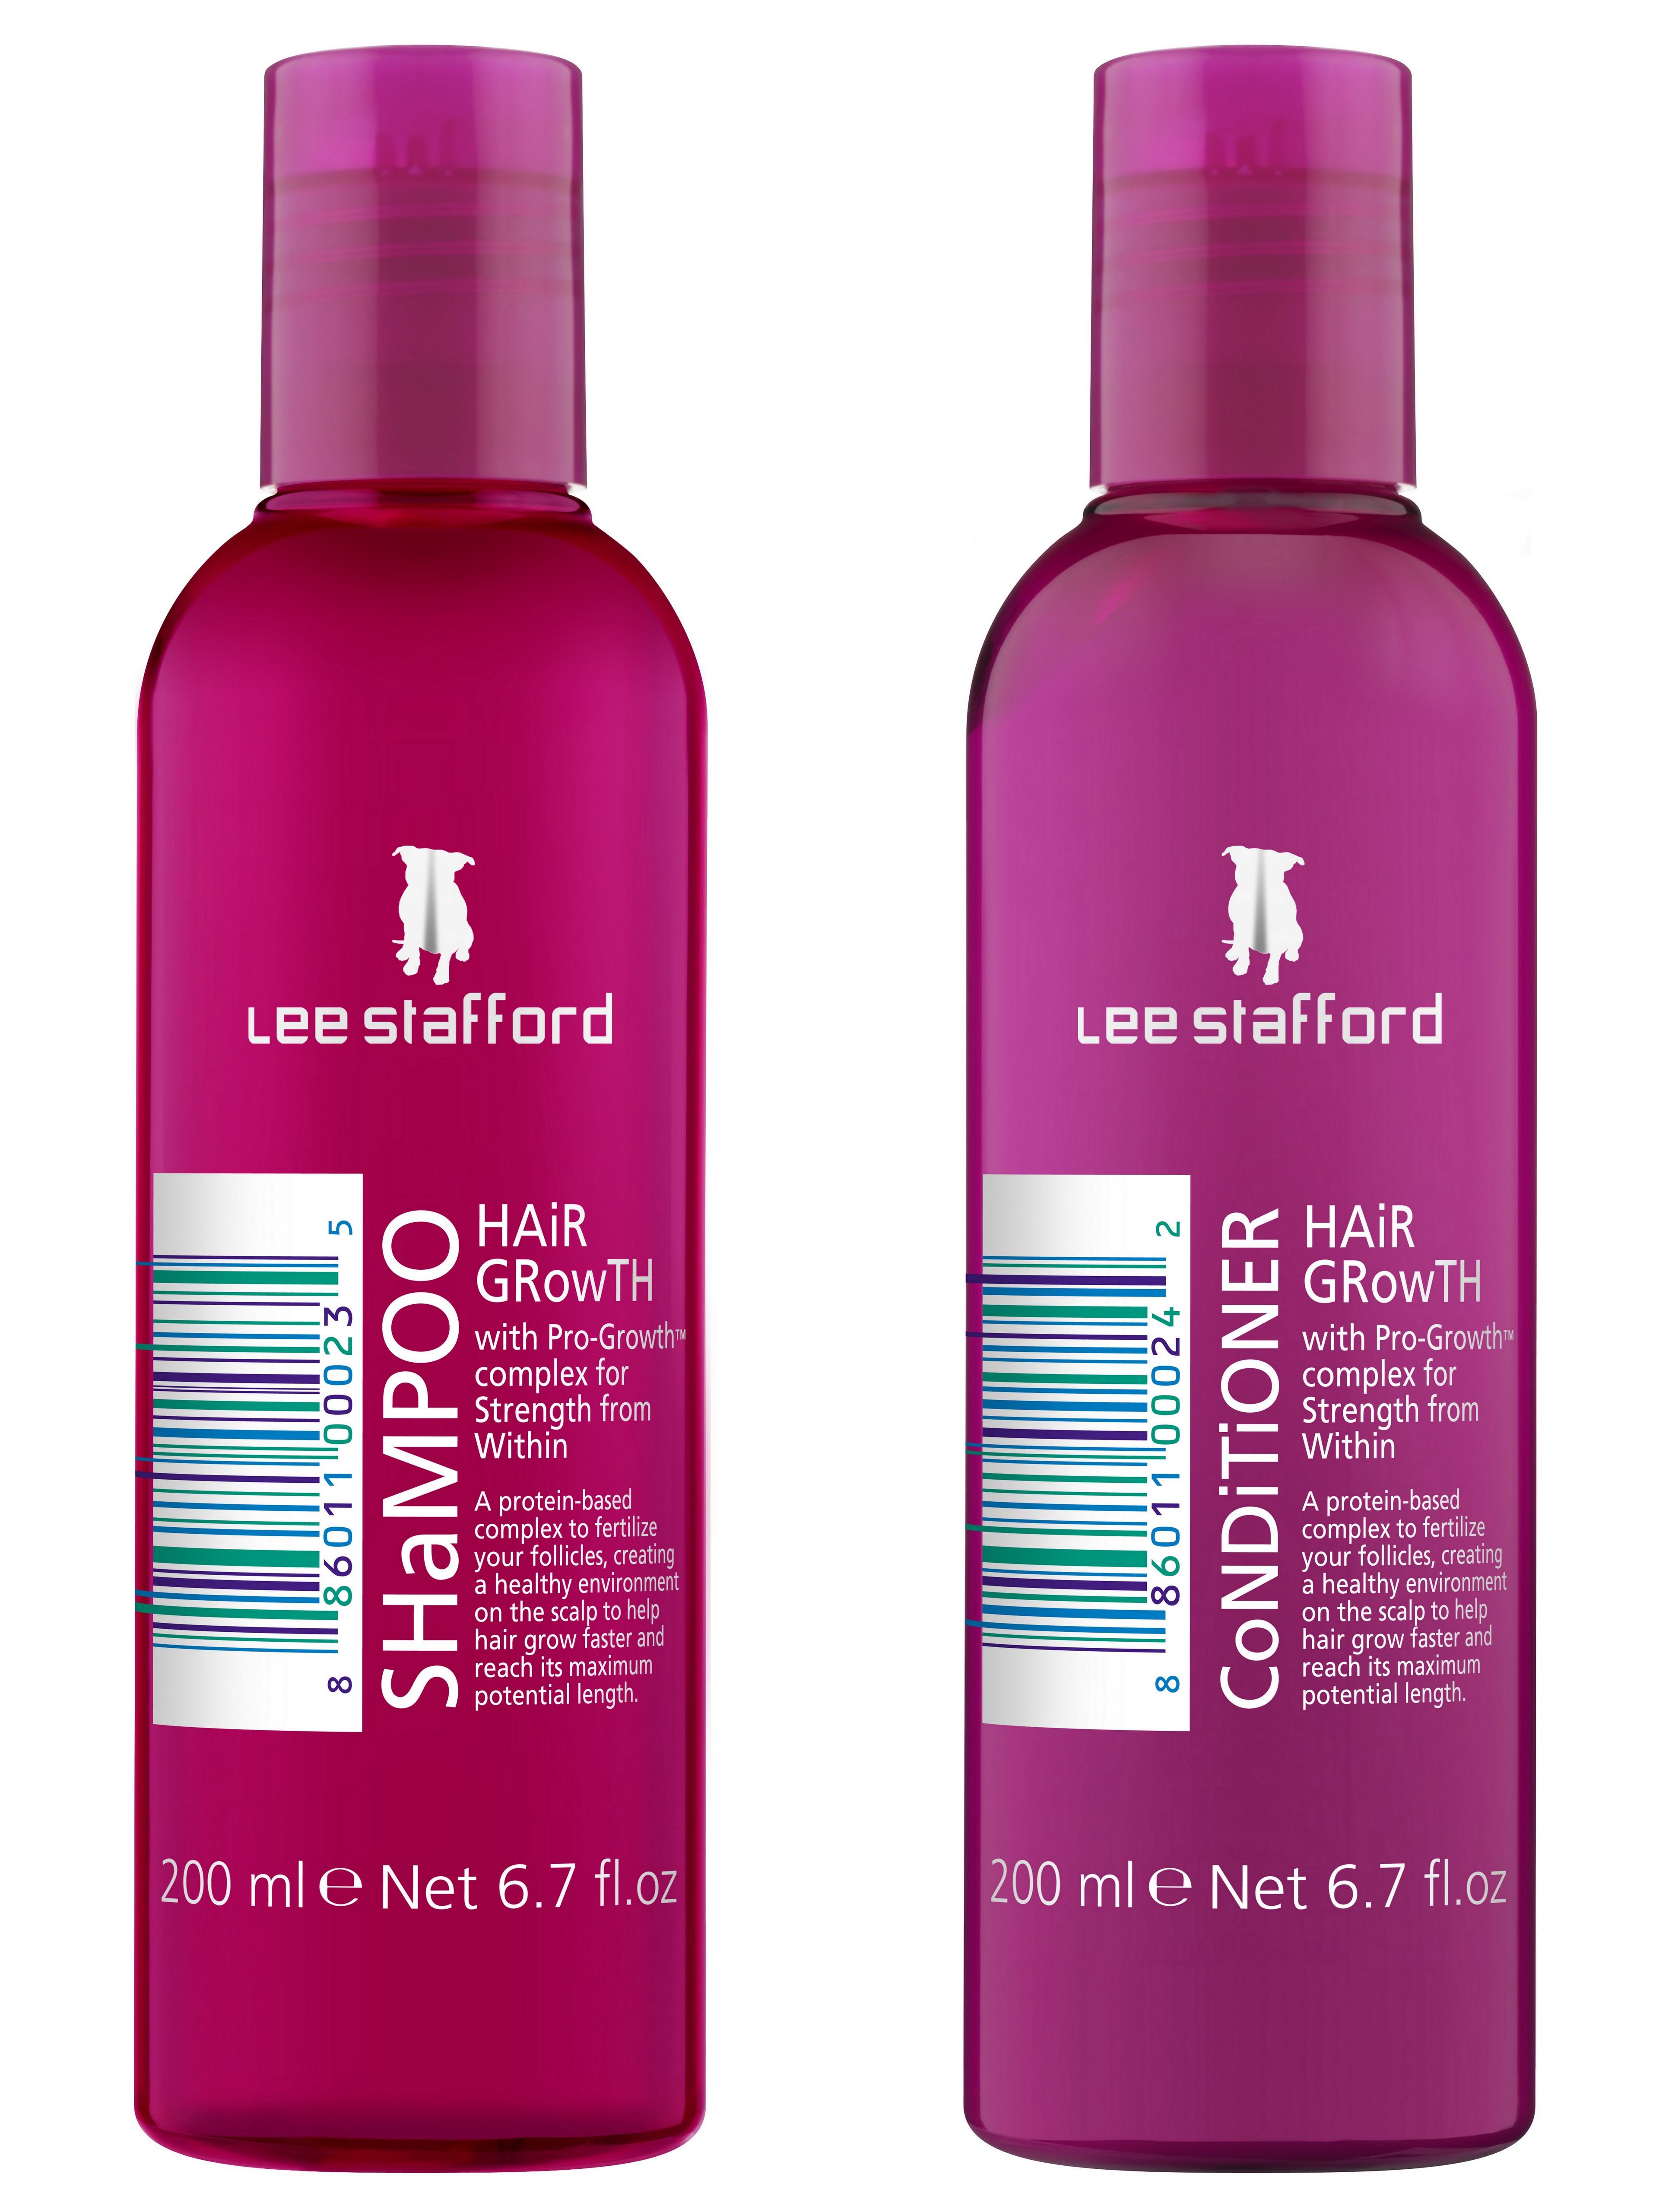 Lee Stafford Launches A New Argan Oil Infused Range Exclusive To